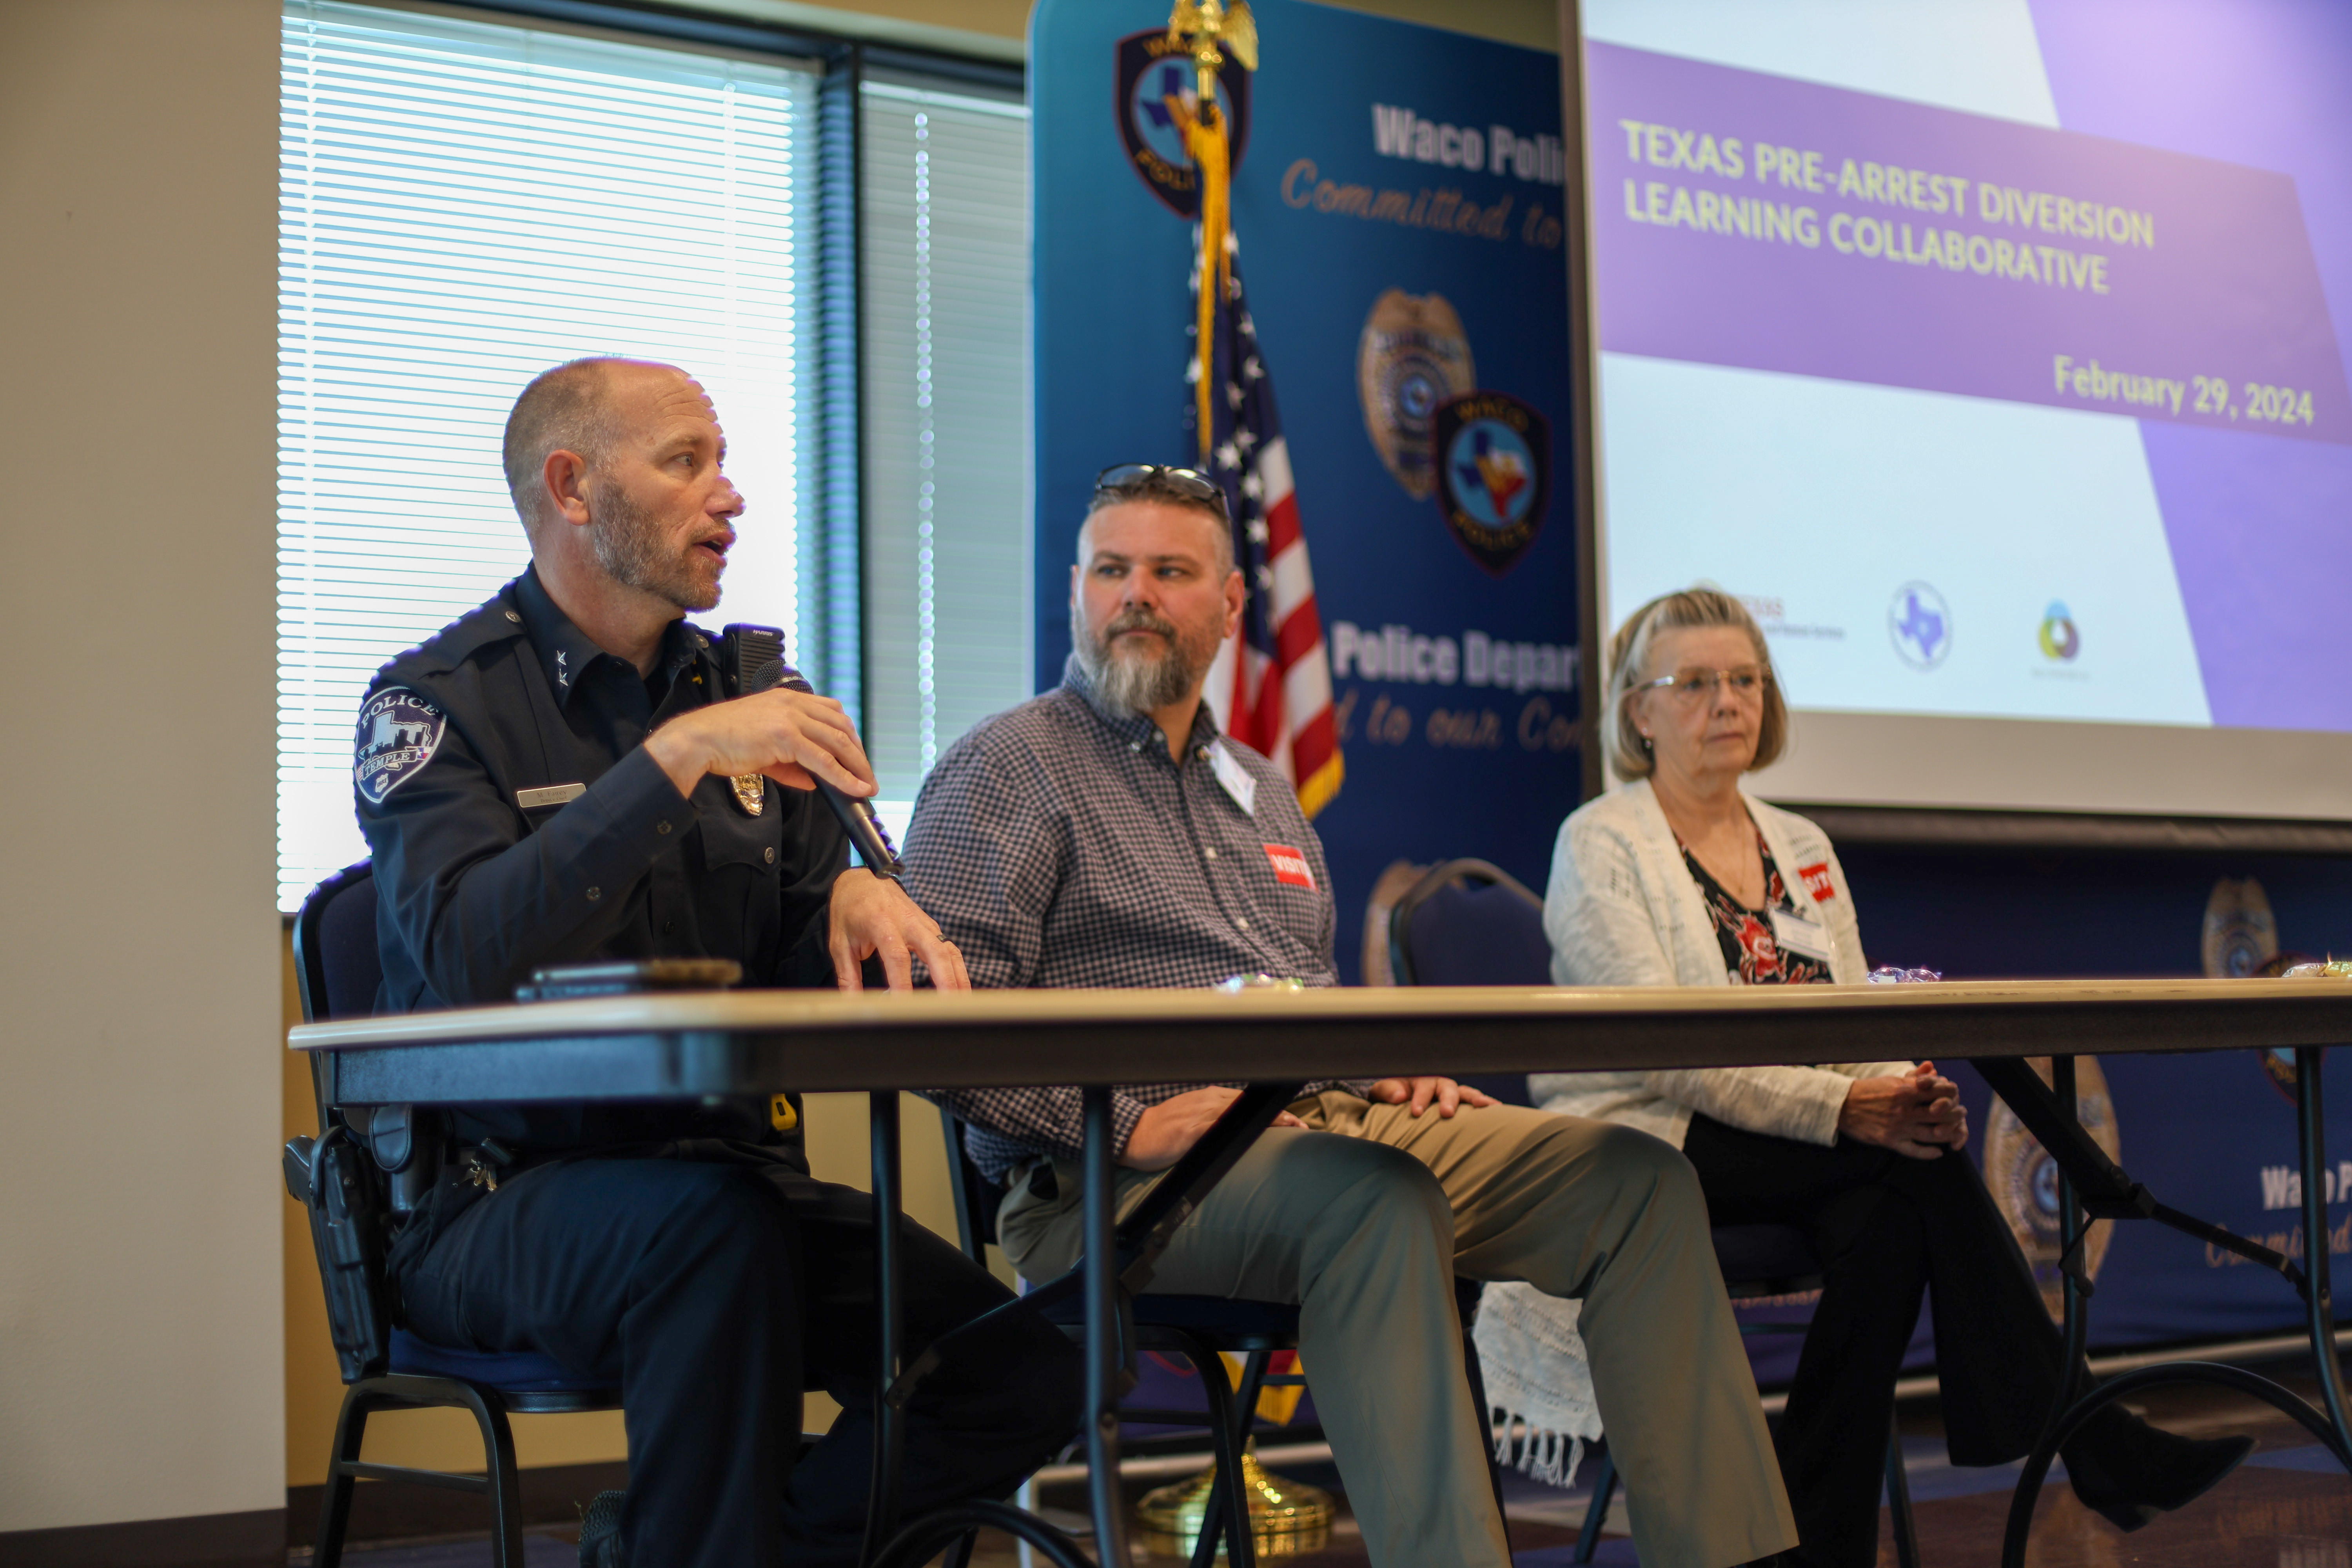 A panel of two men and one woman at the Pre-Arrest Diversion Learning Collaborative meeting.